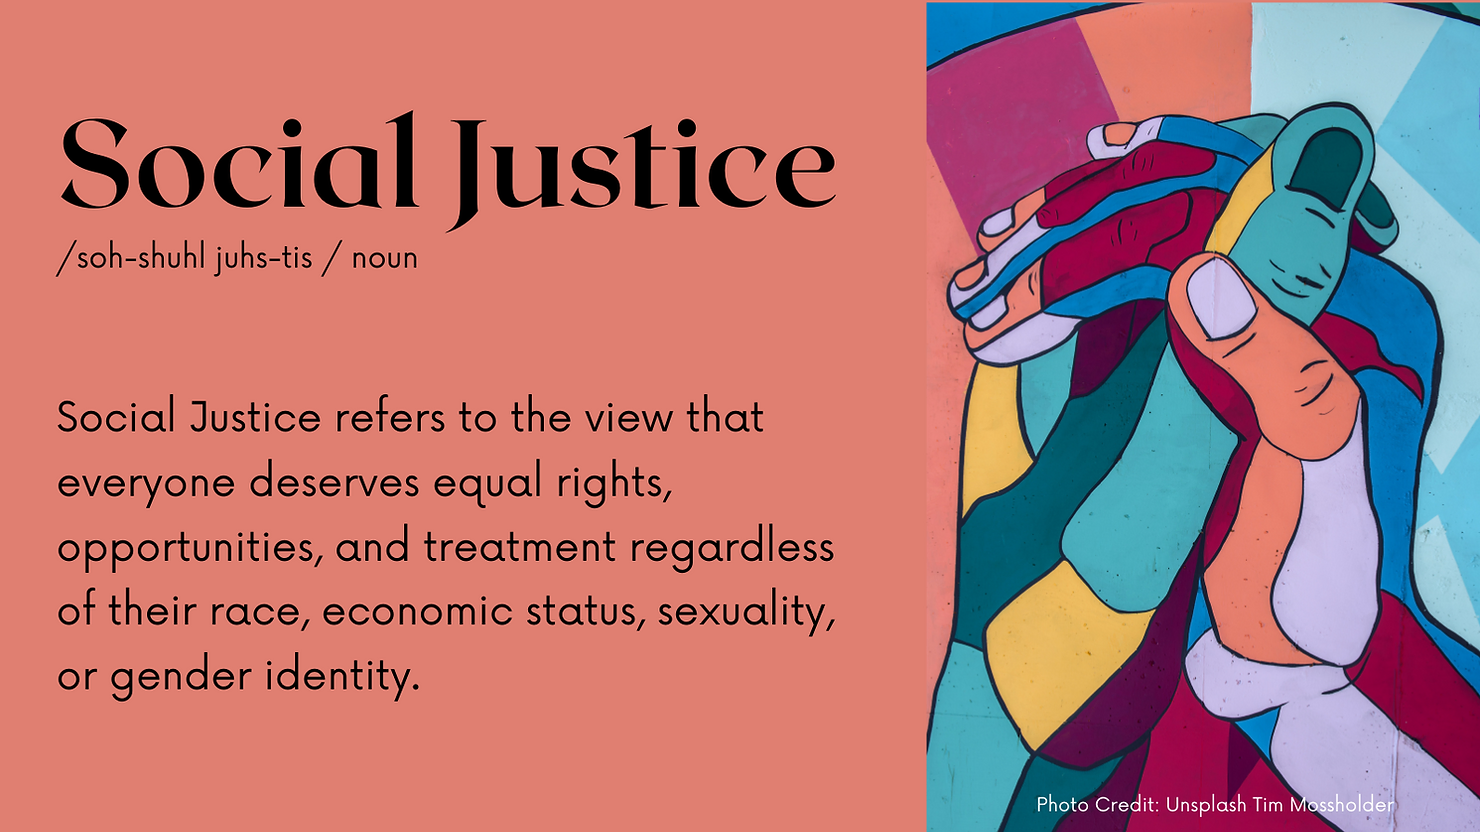 definition of social justice refers to the view that everyone deserves equal rights, opportunities, and treatment regardless of their race, economic status, sexually, or gender identity.